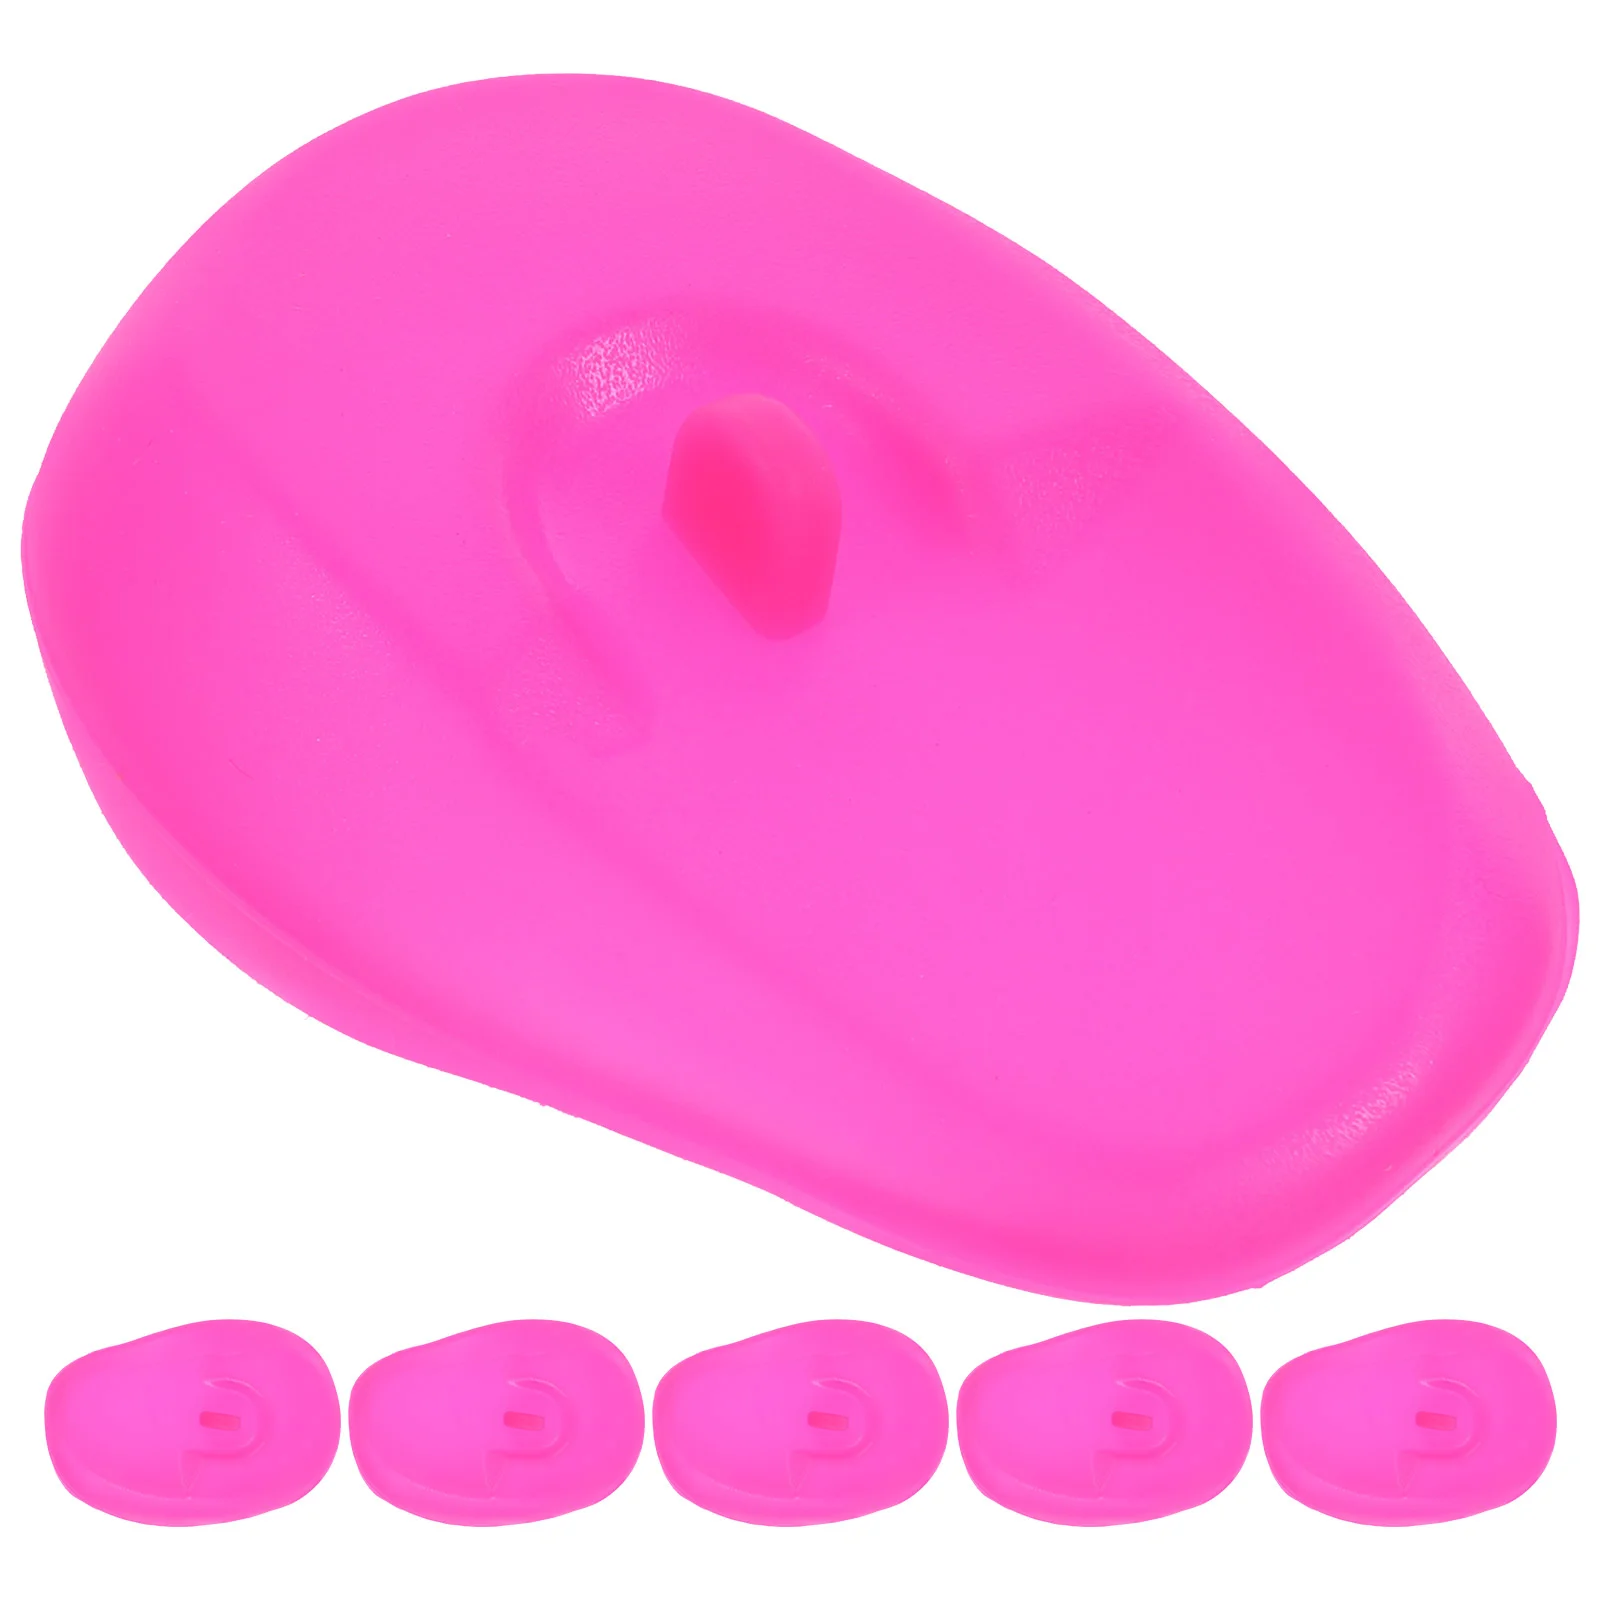 

Hair Dye Silicone Coloring Earmuffs Covers Hairdressing Dyeing Protectors Dryer